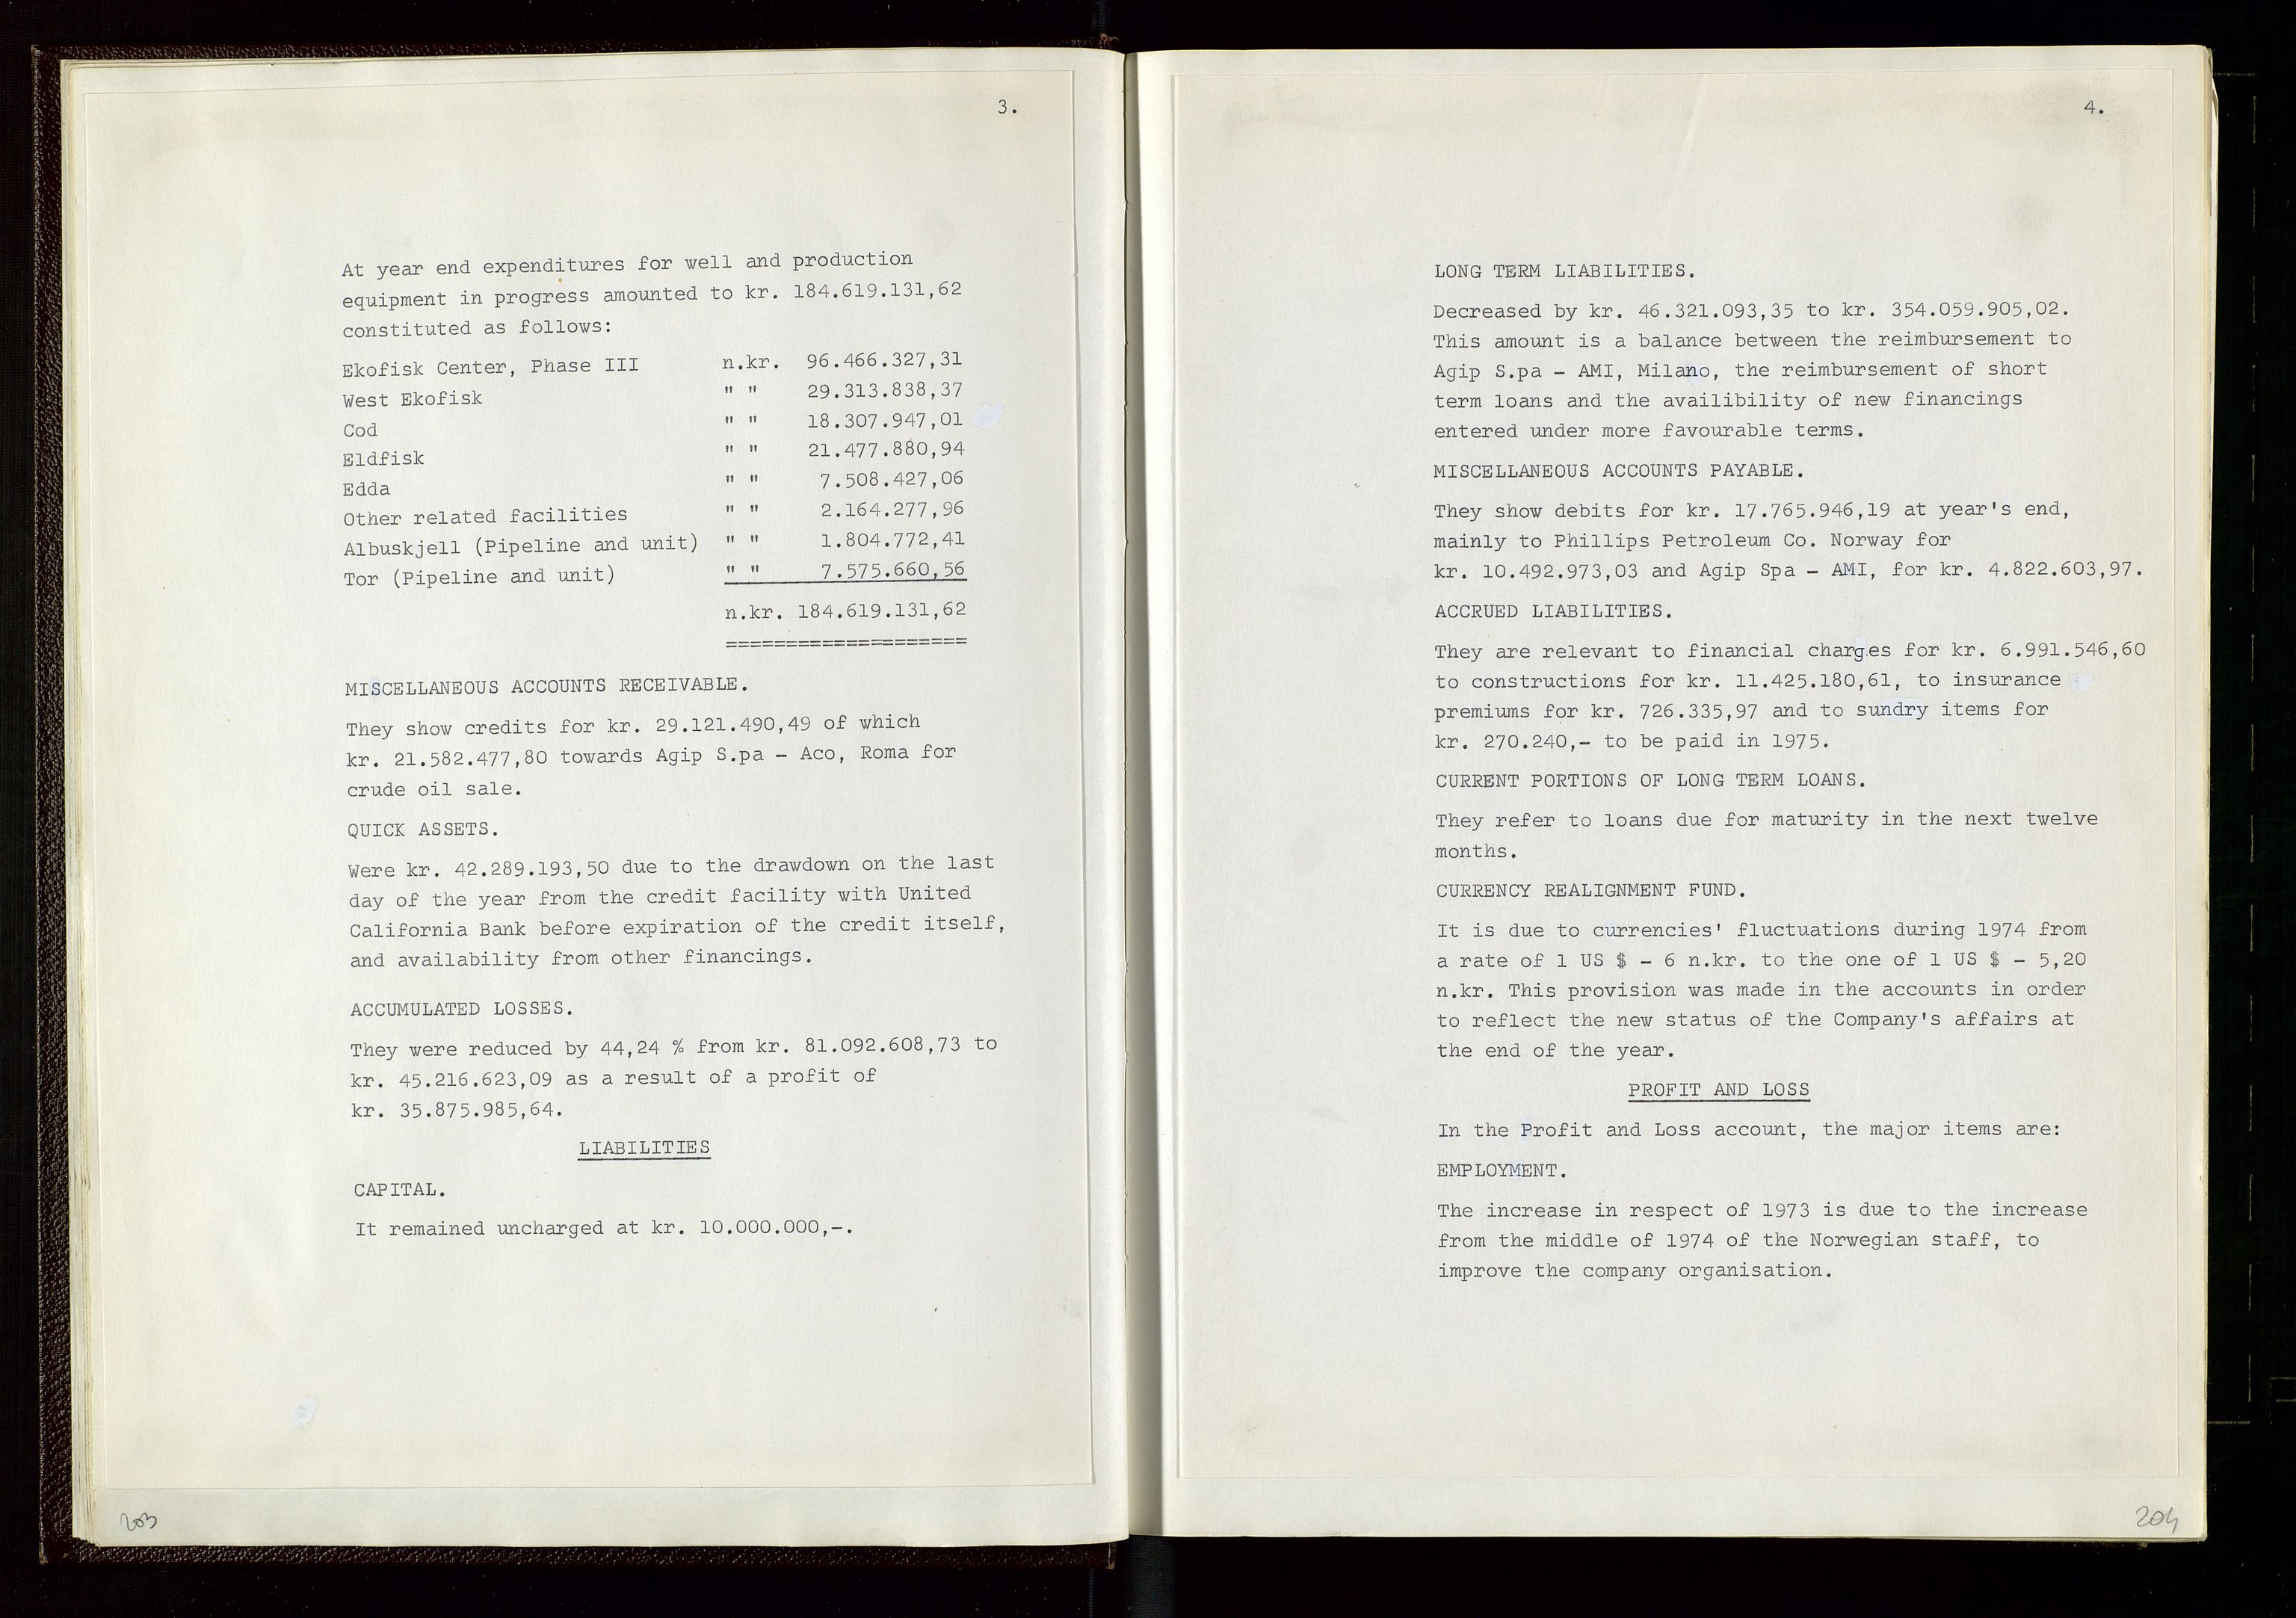 Pa 1583 - Norsk Agip AS, SAST/A-102138/A/Aa/L0002: General assembly and Board of Directors meeting minutes, 1972-1979, s. 203-204